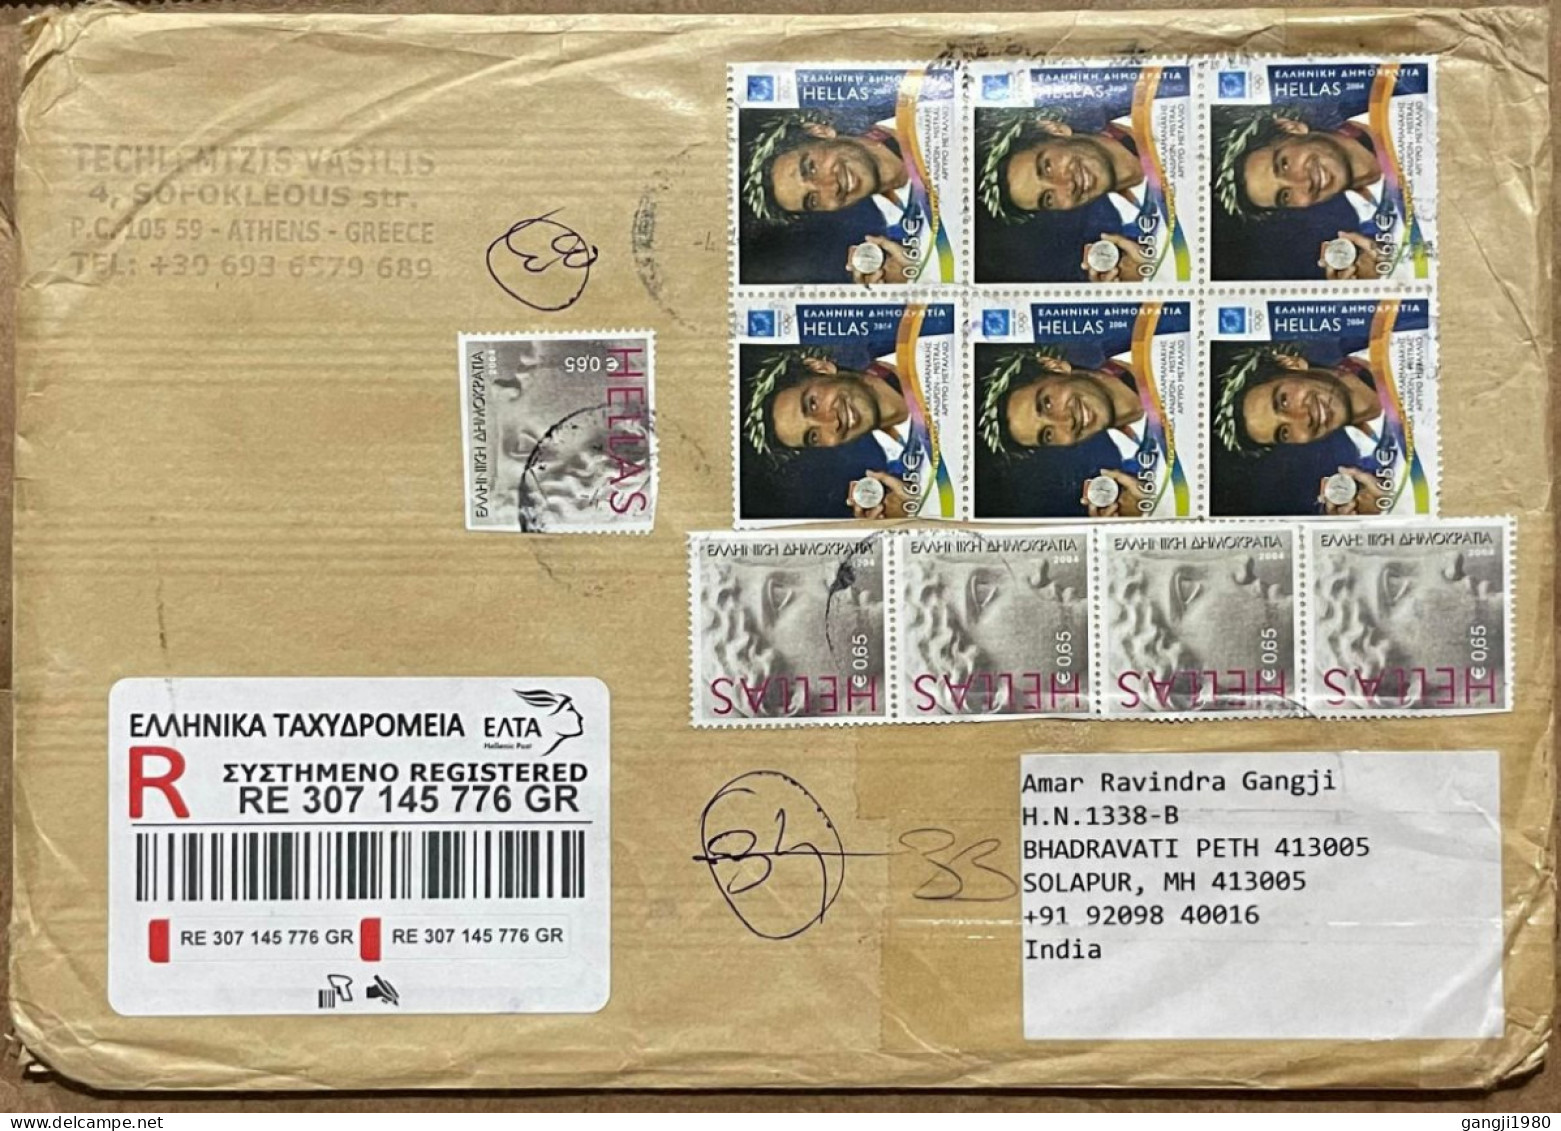 GREECE TO INDIA 2024, REGISTER COVER USED, 11 MULTI STAMP, 2004 ATHENS OLYMPIC, NIKOS KAKLAMANAKIS SILVER MEDAL,WINDSURF - Covers & Documents